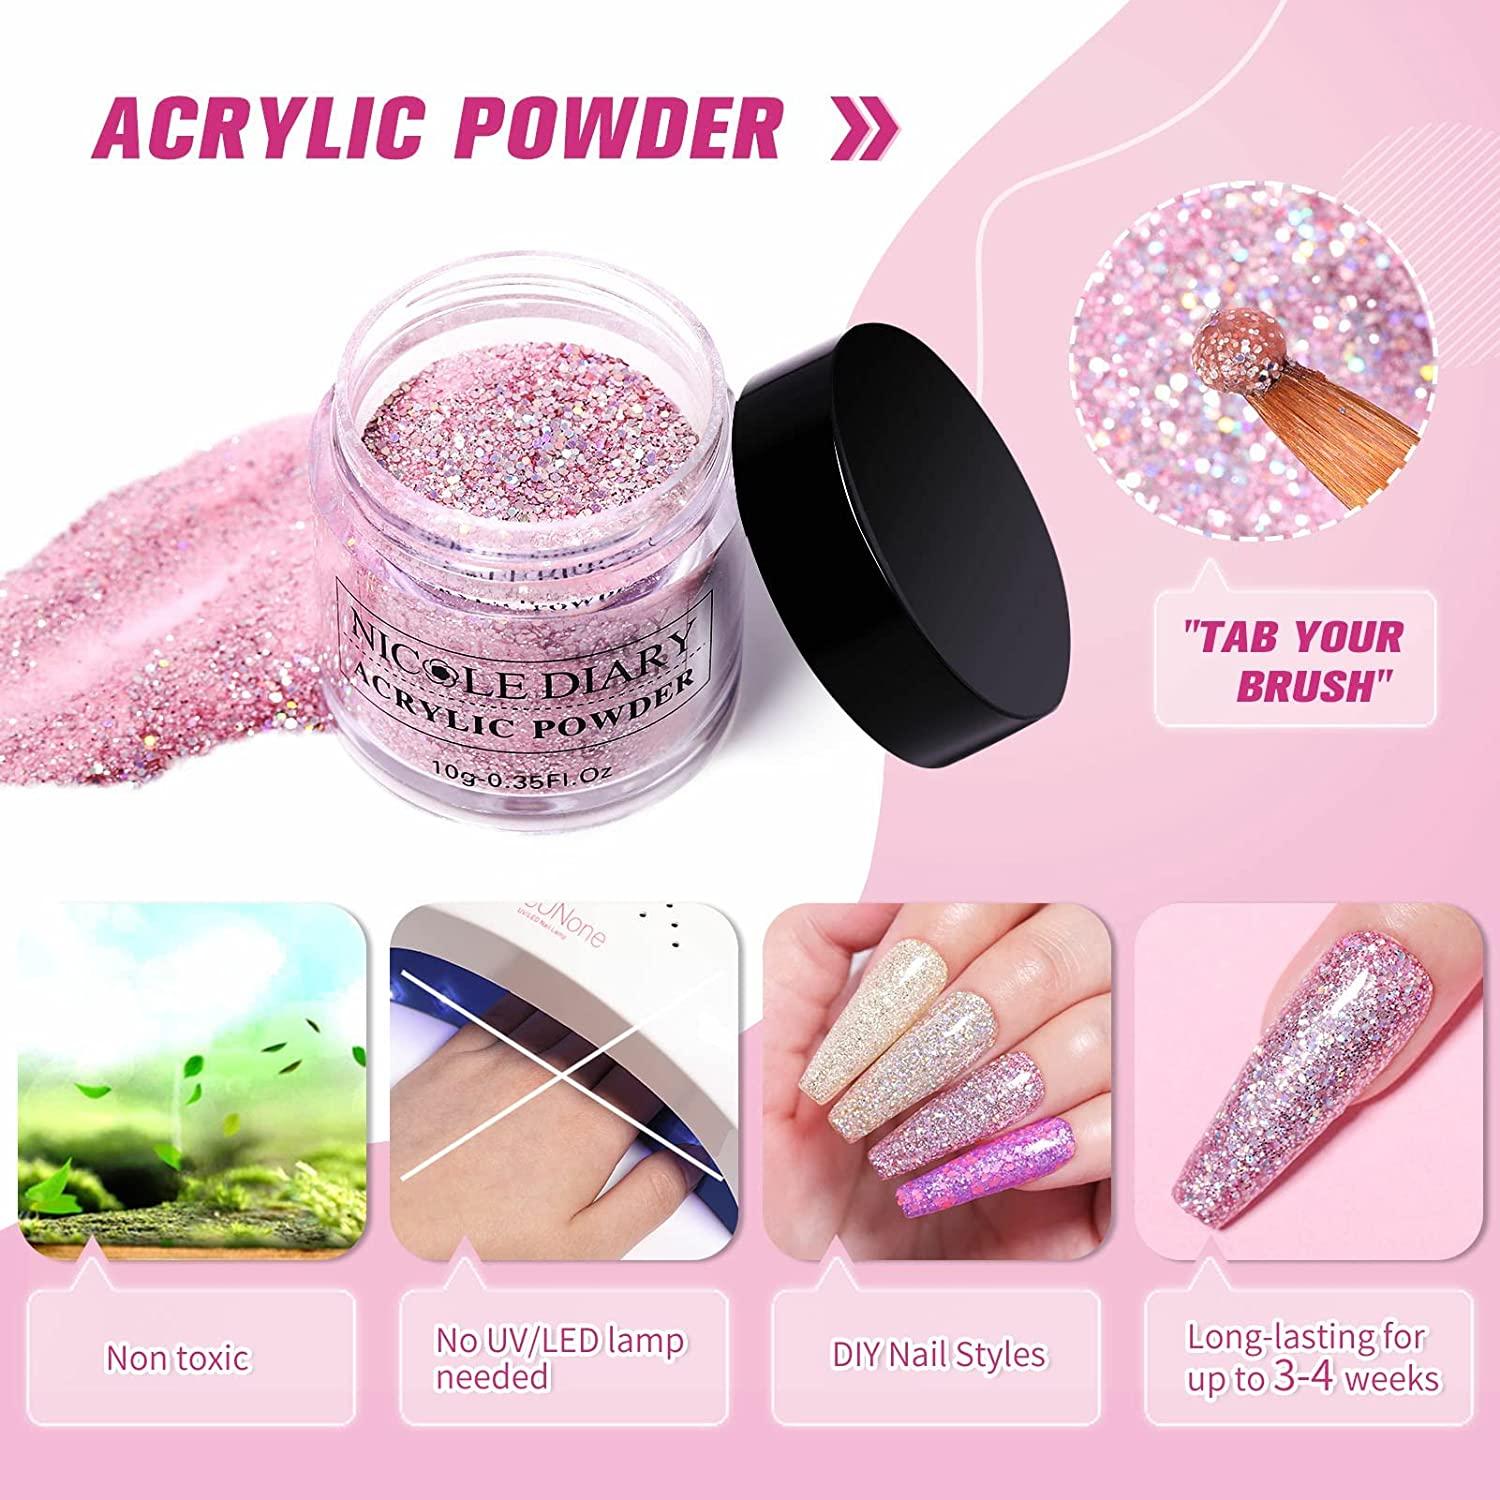 NICOLE DIARY Dip Dipping Powder Jelly Pink Nail Glitter Polish Chrome  Gradient Natural Dry Acrylic Nails Nail Art Decoration From Ladylove,  $53.83